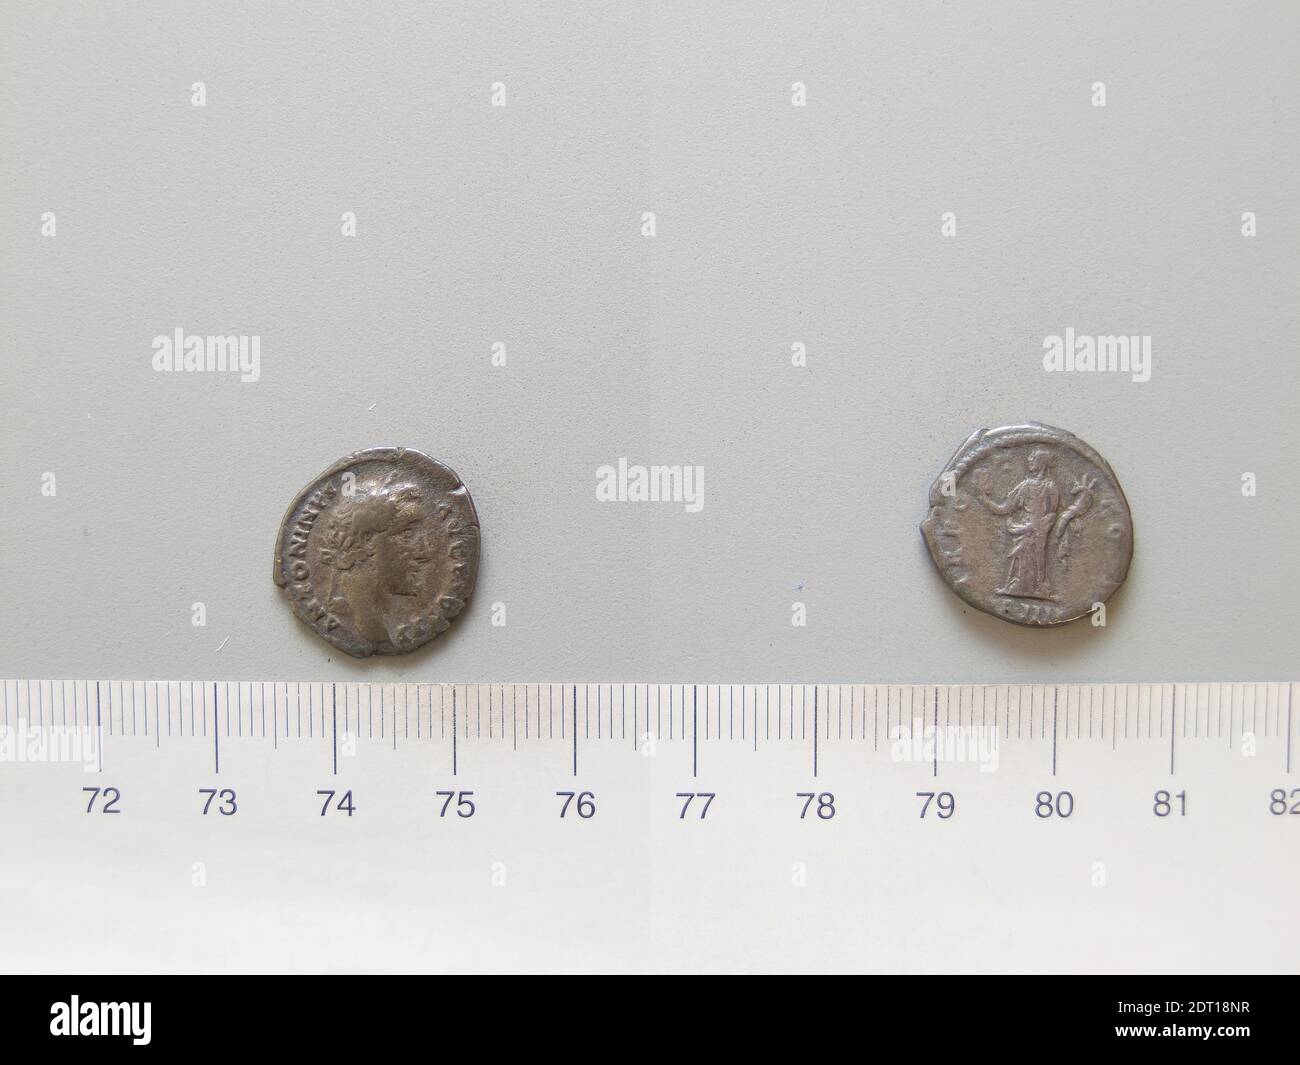 Ruler: Antoninus Pius, Emperor of Rome, A.D. 86–161, ruled A.D. 138–161, Mint: Rome, Denarius of Antoninus Pius, Emperor of Rome from Rome, A.D. 145–61, Silver, 2.82 g, 7:00, 17.7 mm, Made in Rome, Italy, Roman, 2nd century A.D., Numismatics Stock Photo